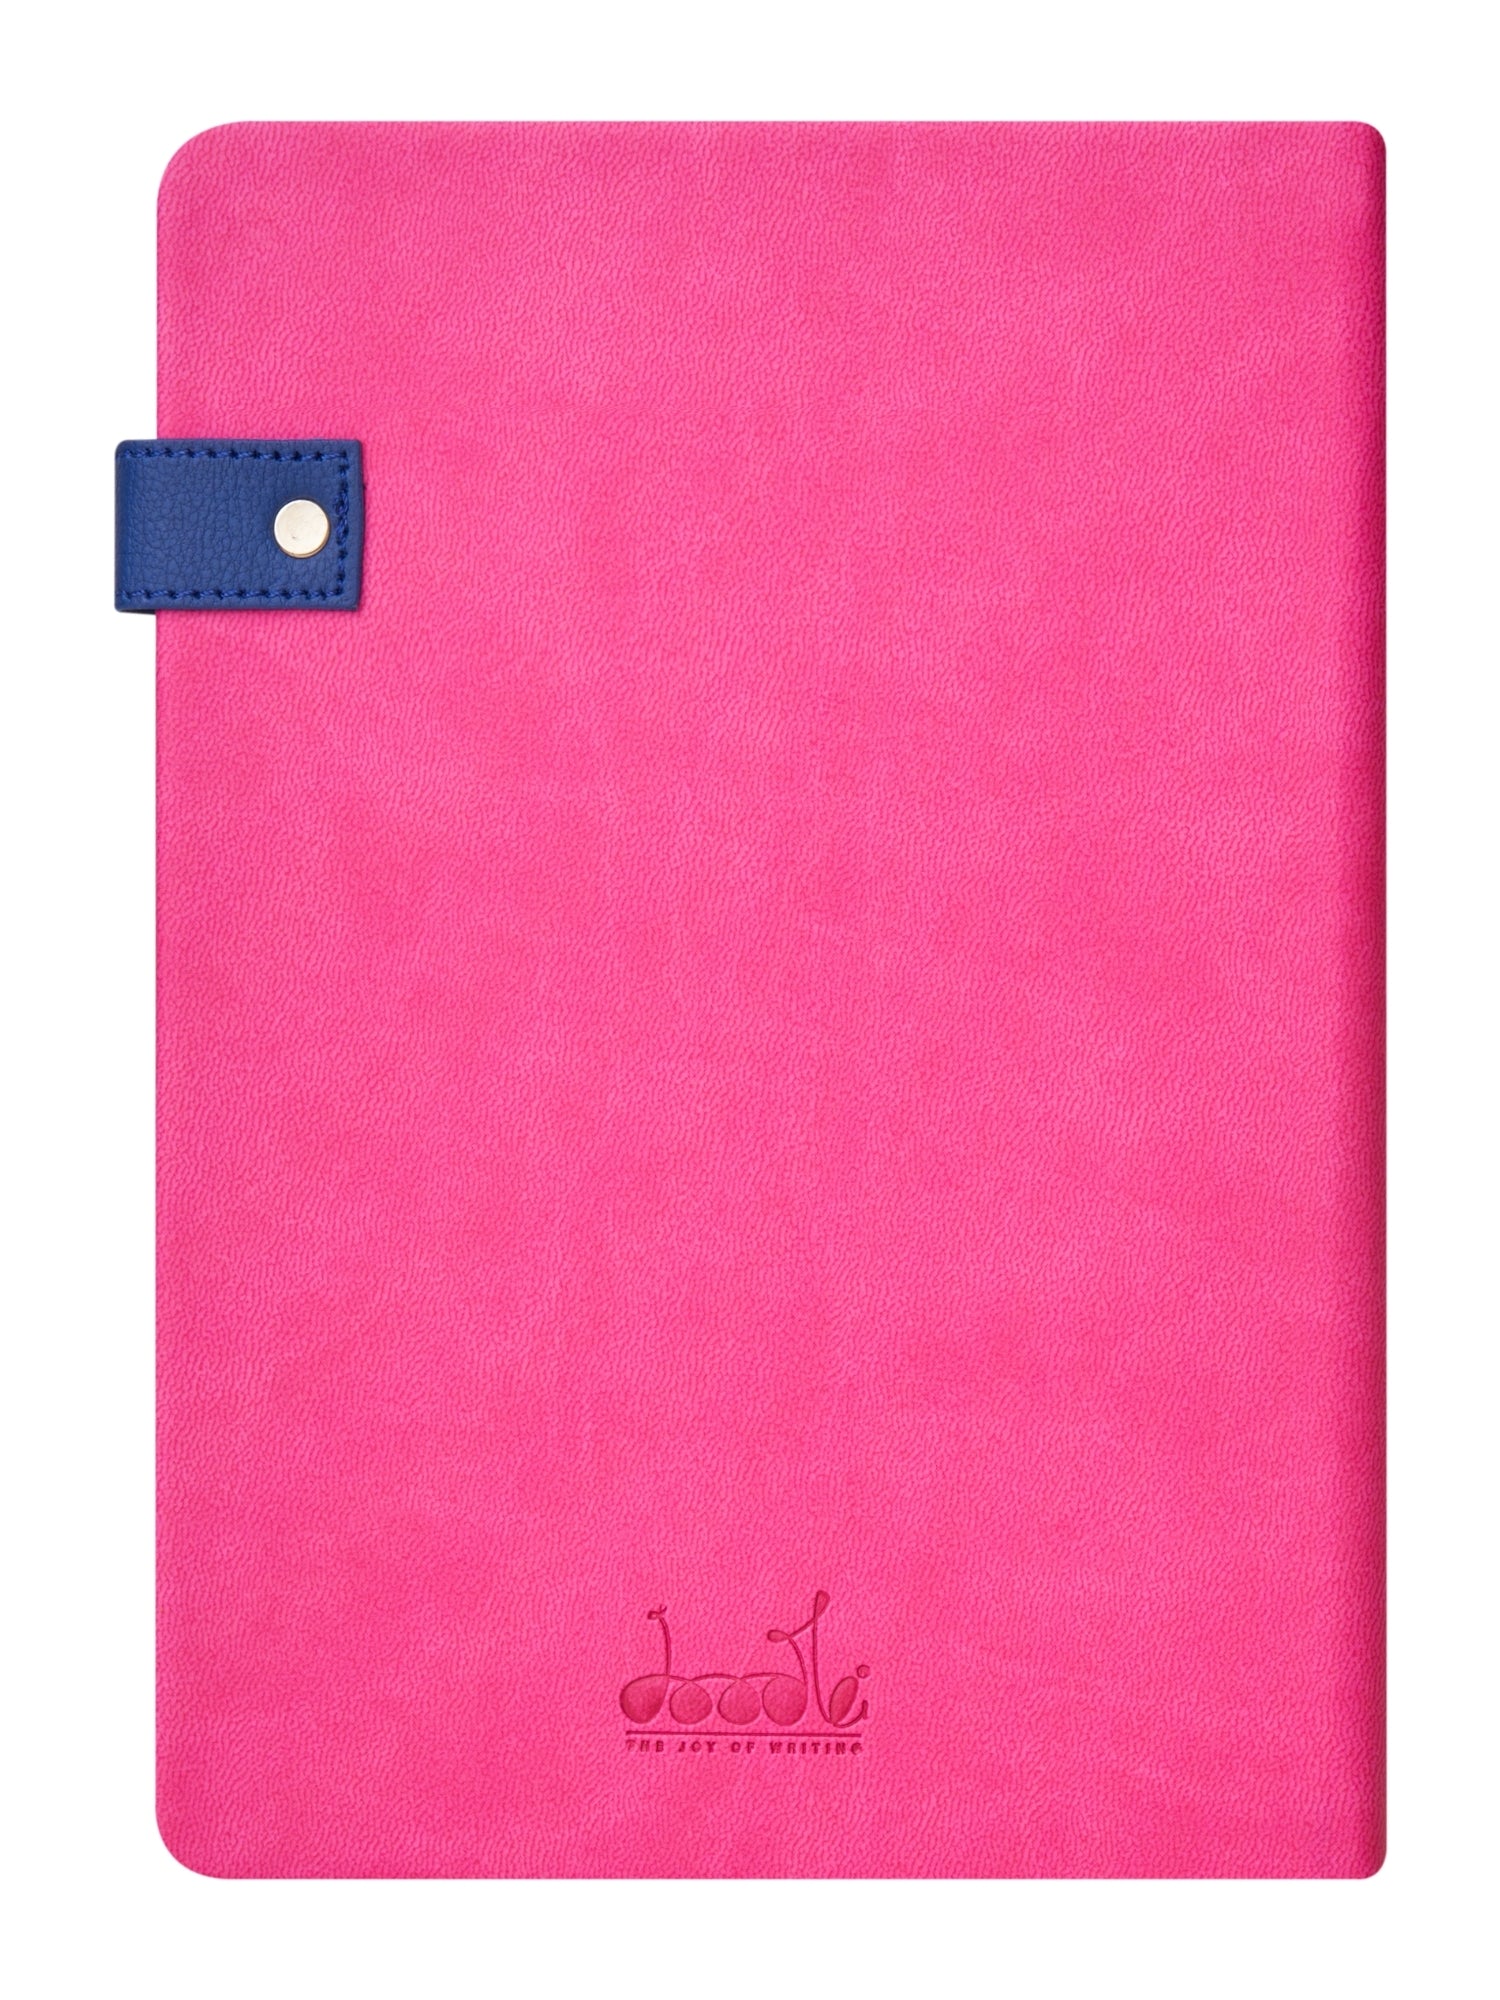 Doodle A5 Vegan Leather Flip Bound Notebook with magnetic Flip Closure - Underestimate Me